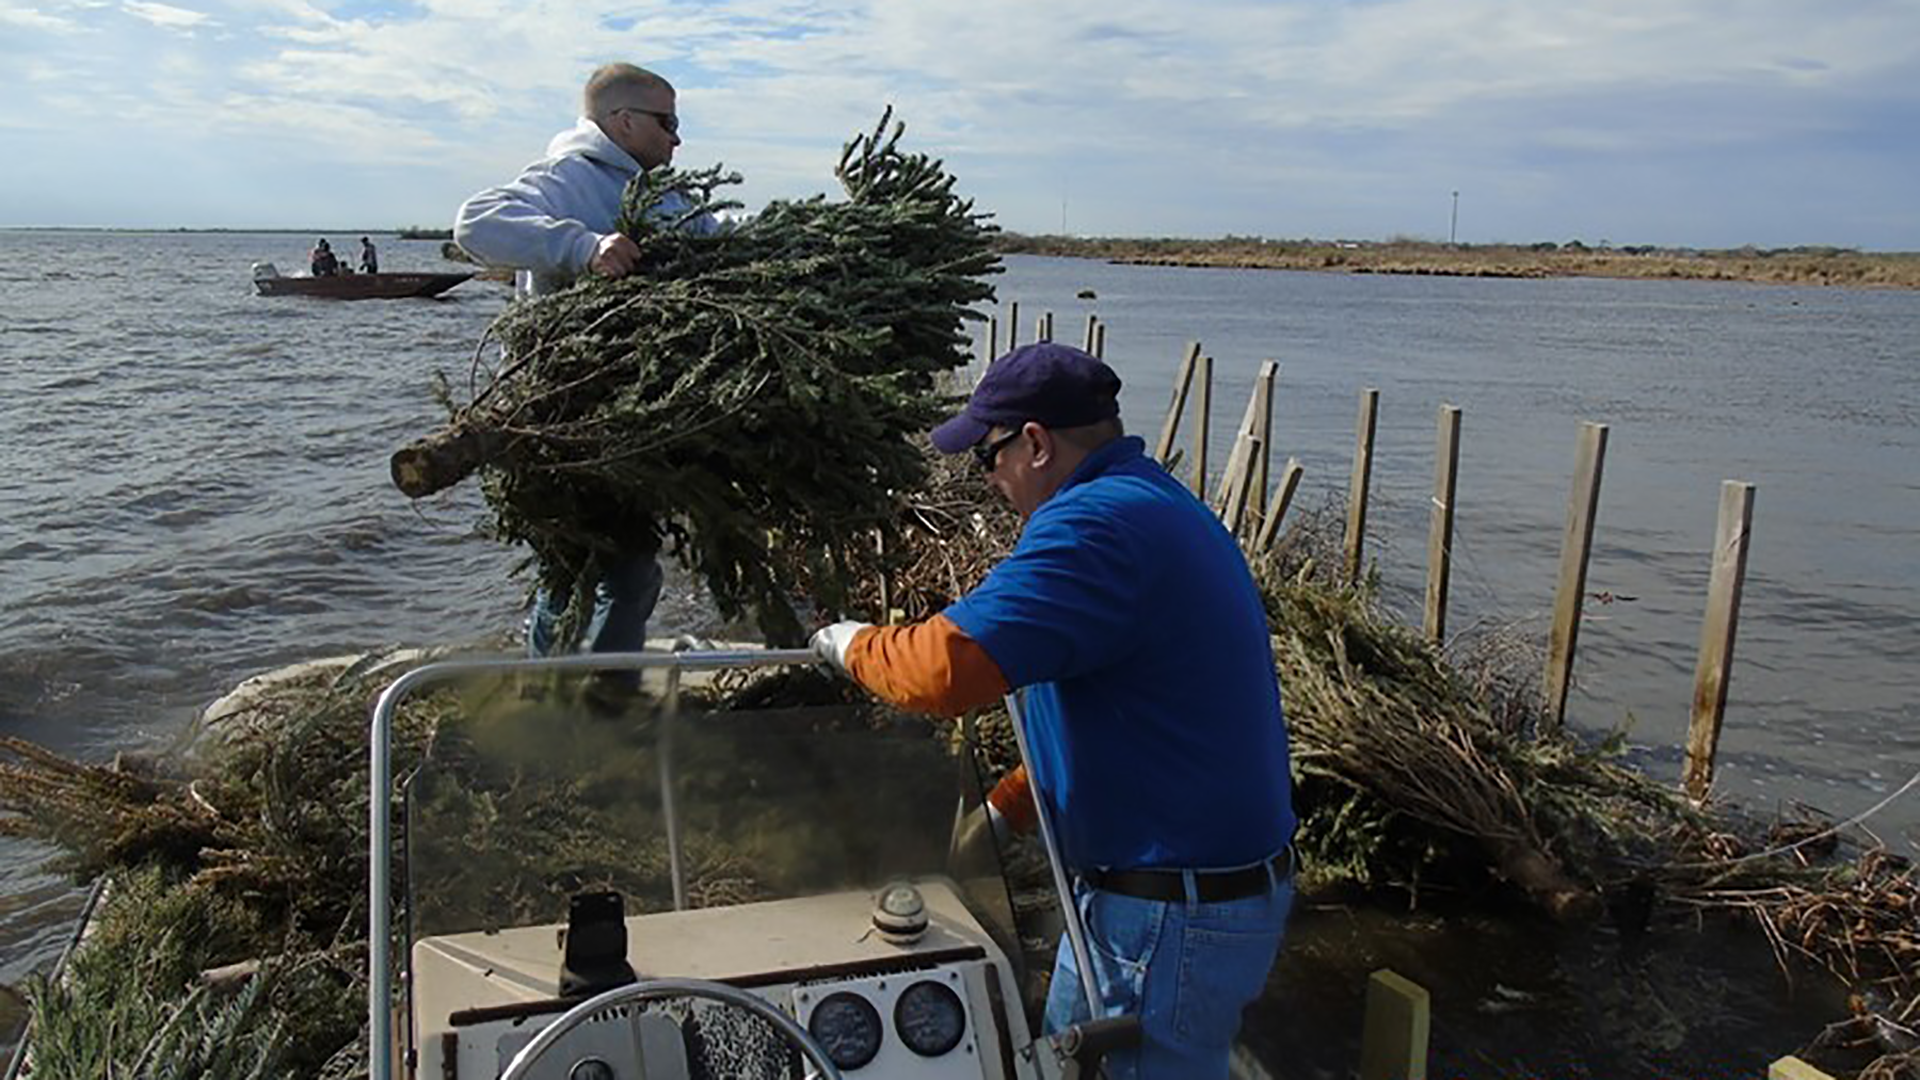 Since 1991, 800,000 Christmas trees have been donated through Jefferson Parish's recycling program.